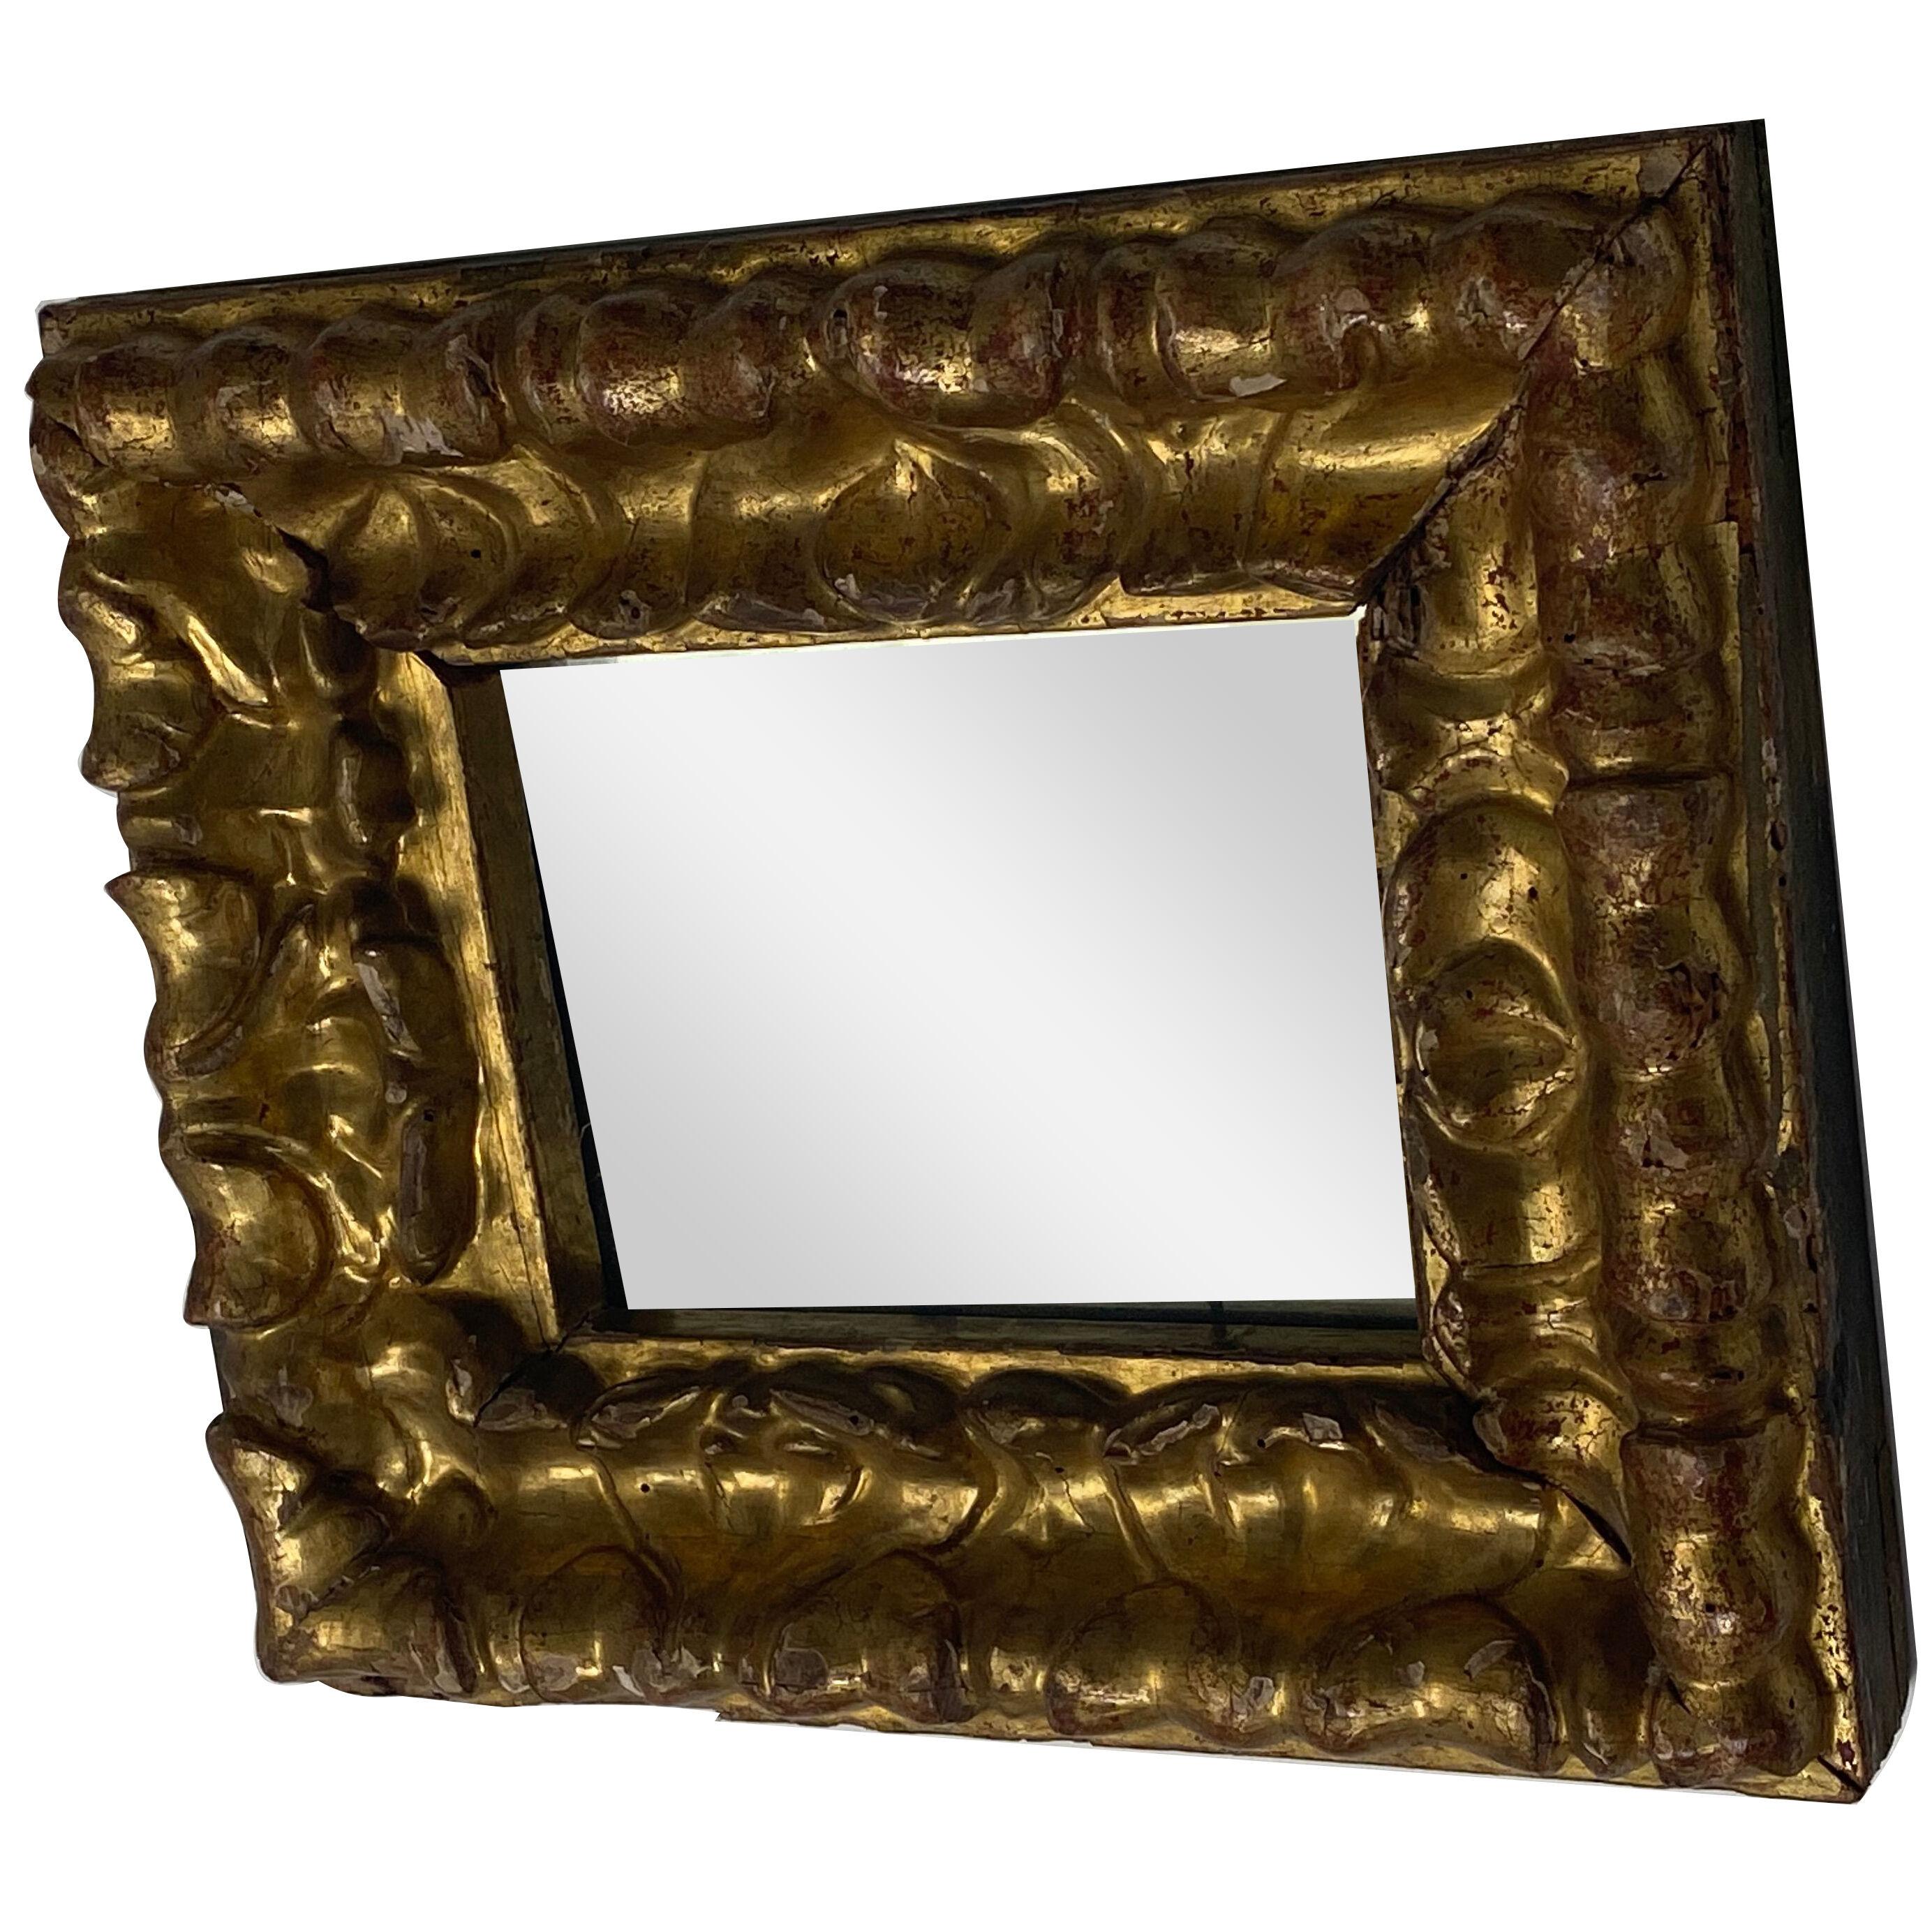 Guilded Wooden Mirror